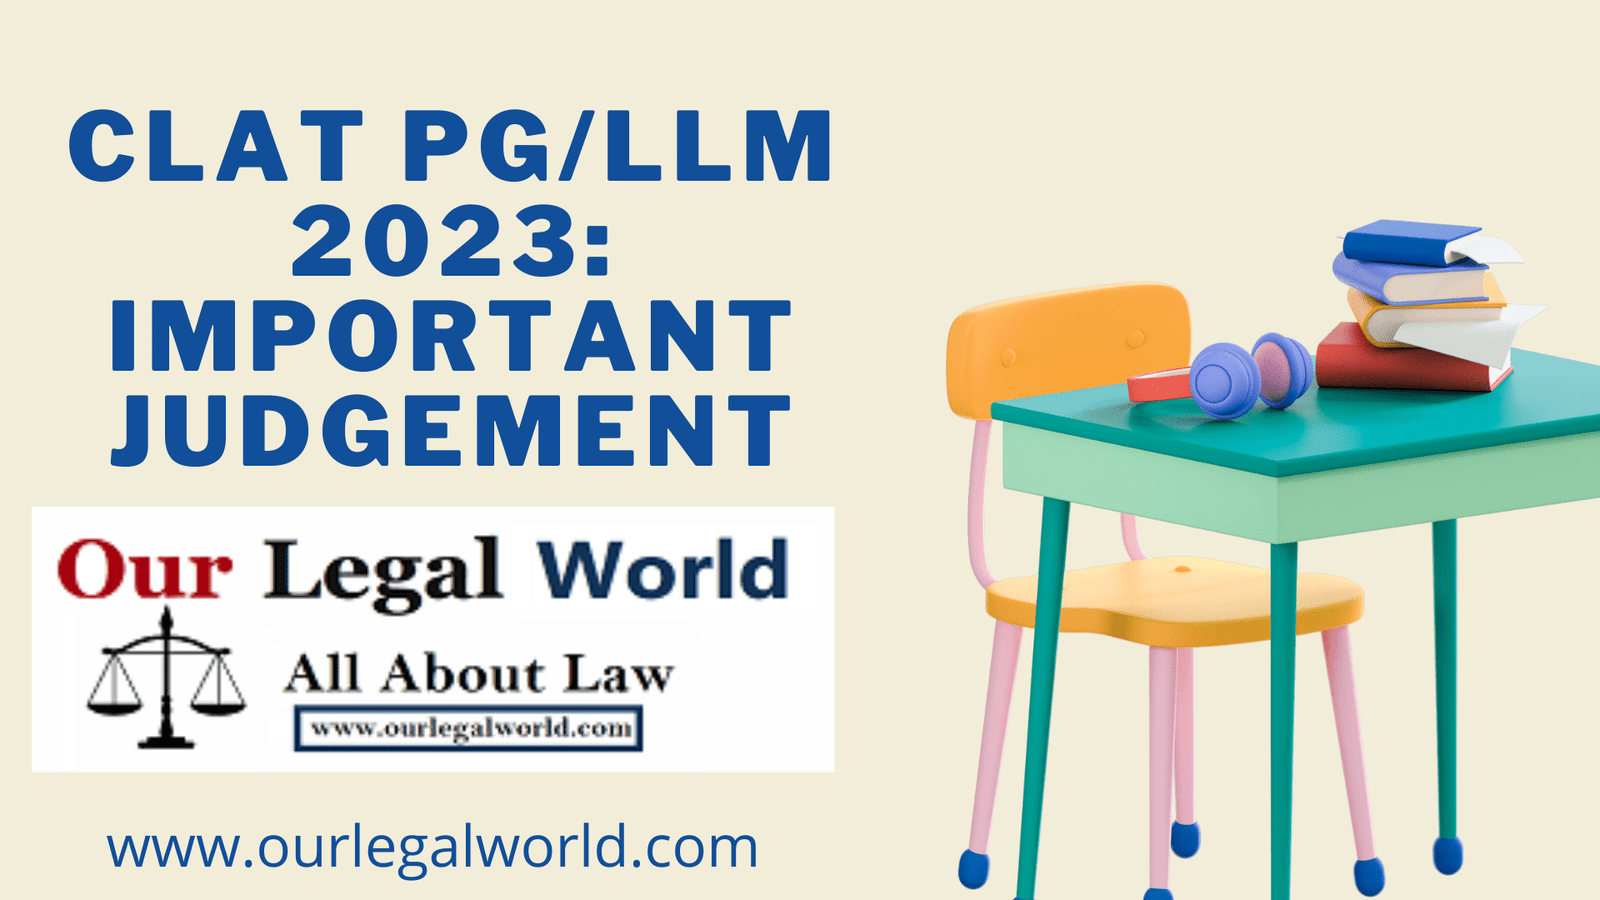 CLAT PG/LLM 2023: Important Judgements: OurLegalWorld